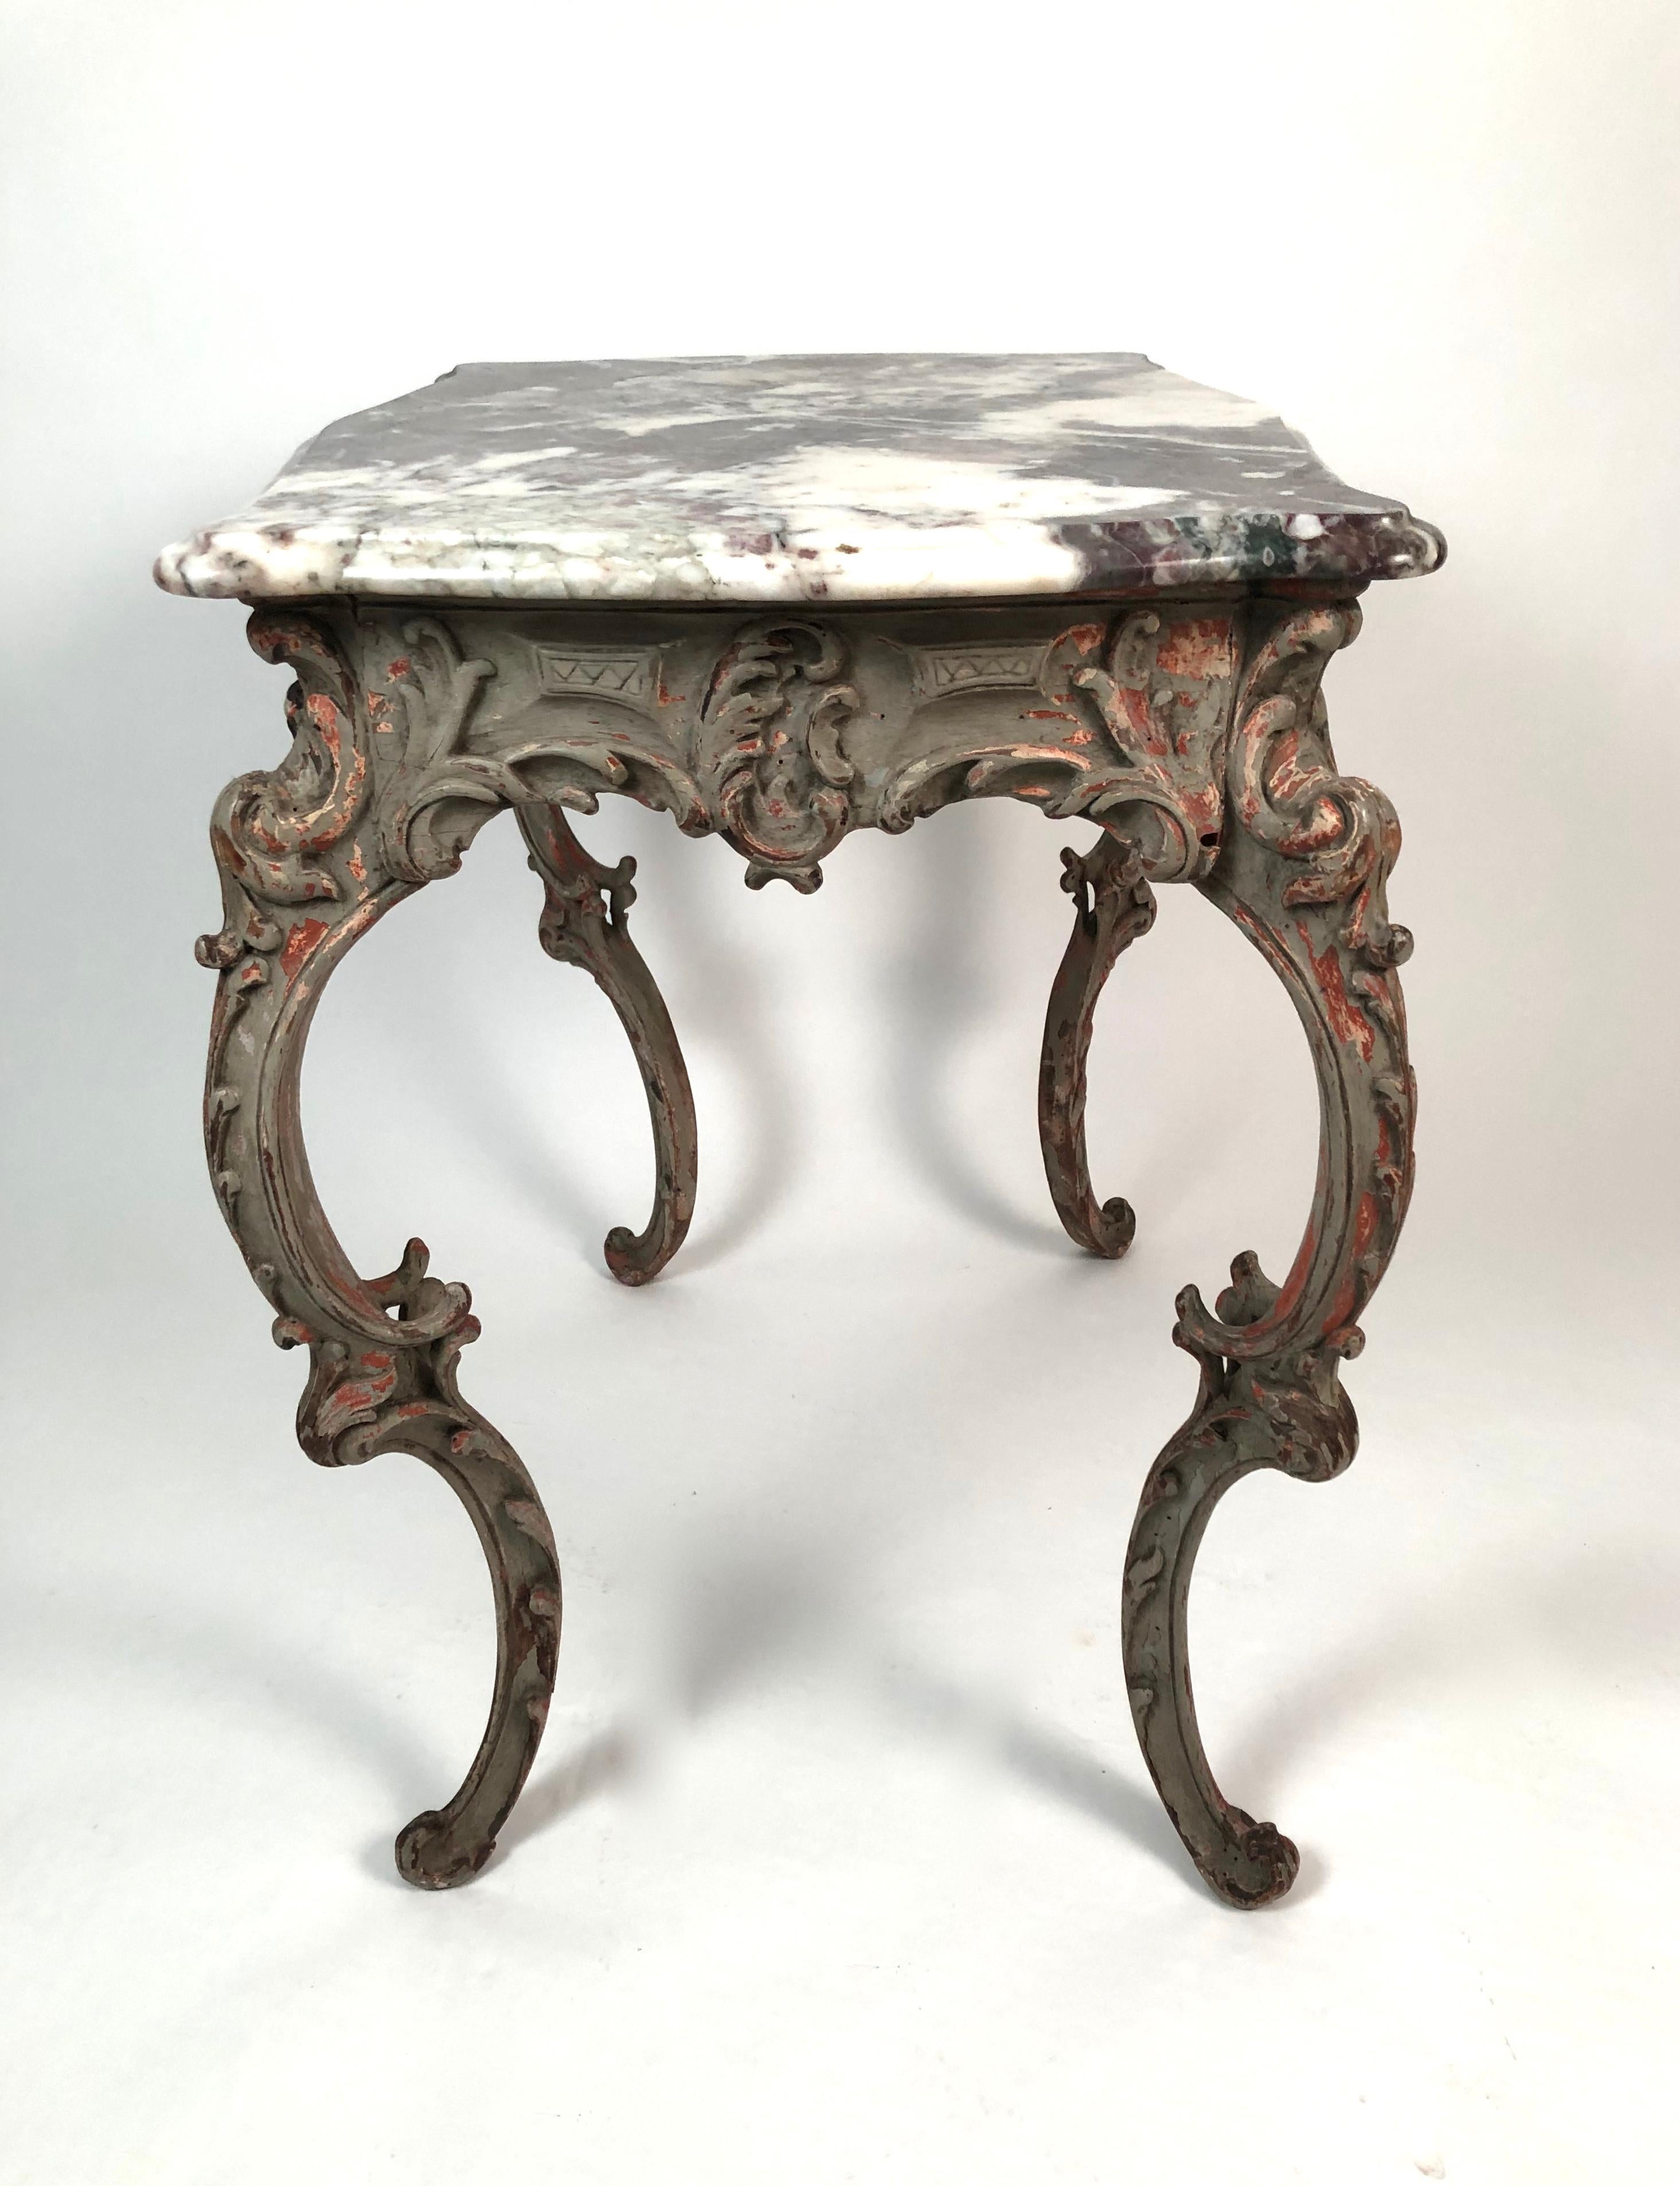 Painted 18th Century Rococo Italian Marble-Top Table